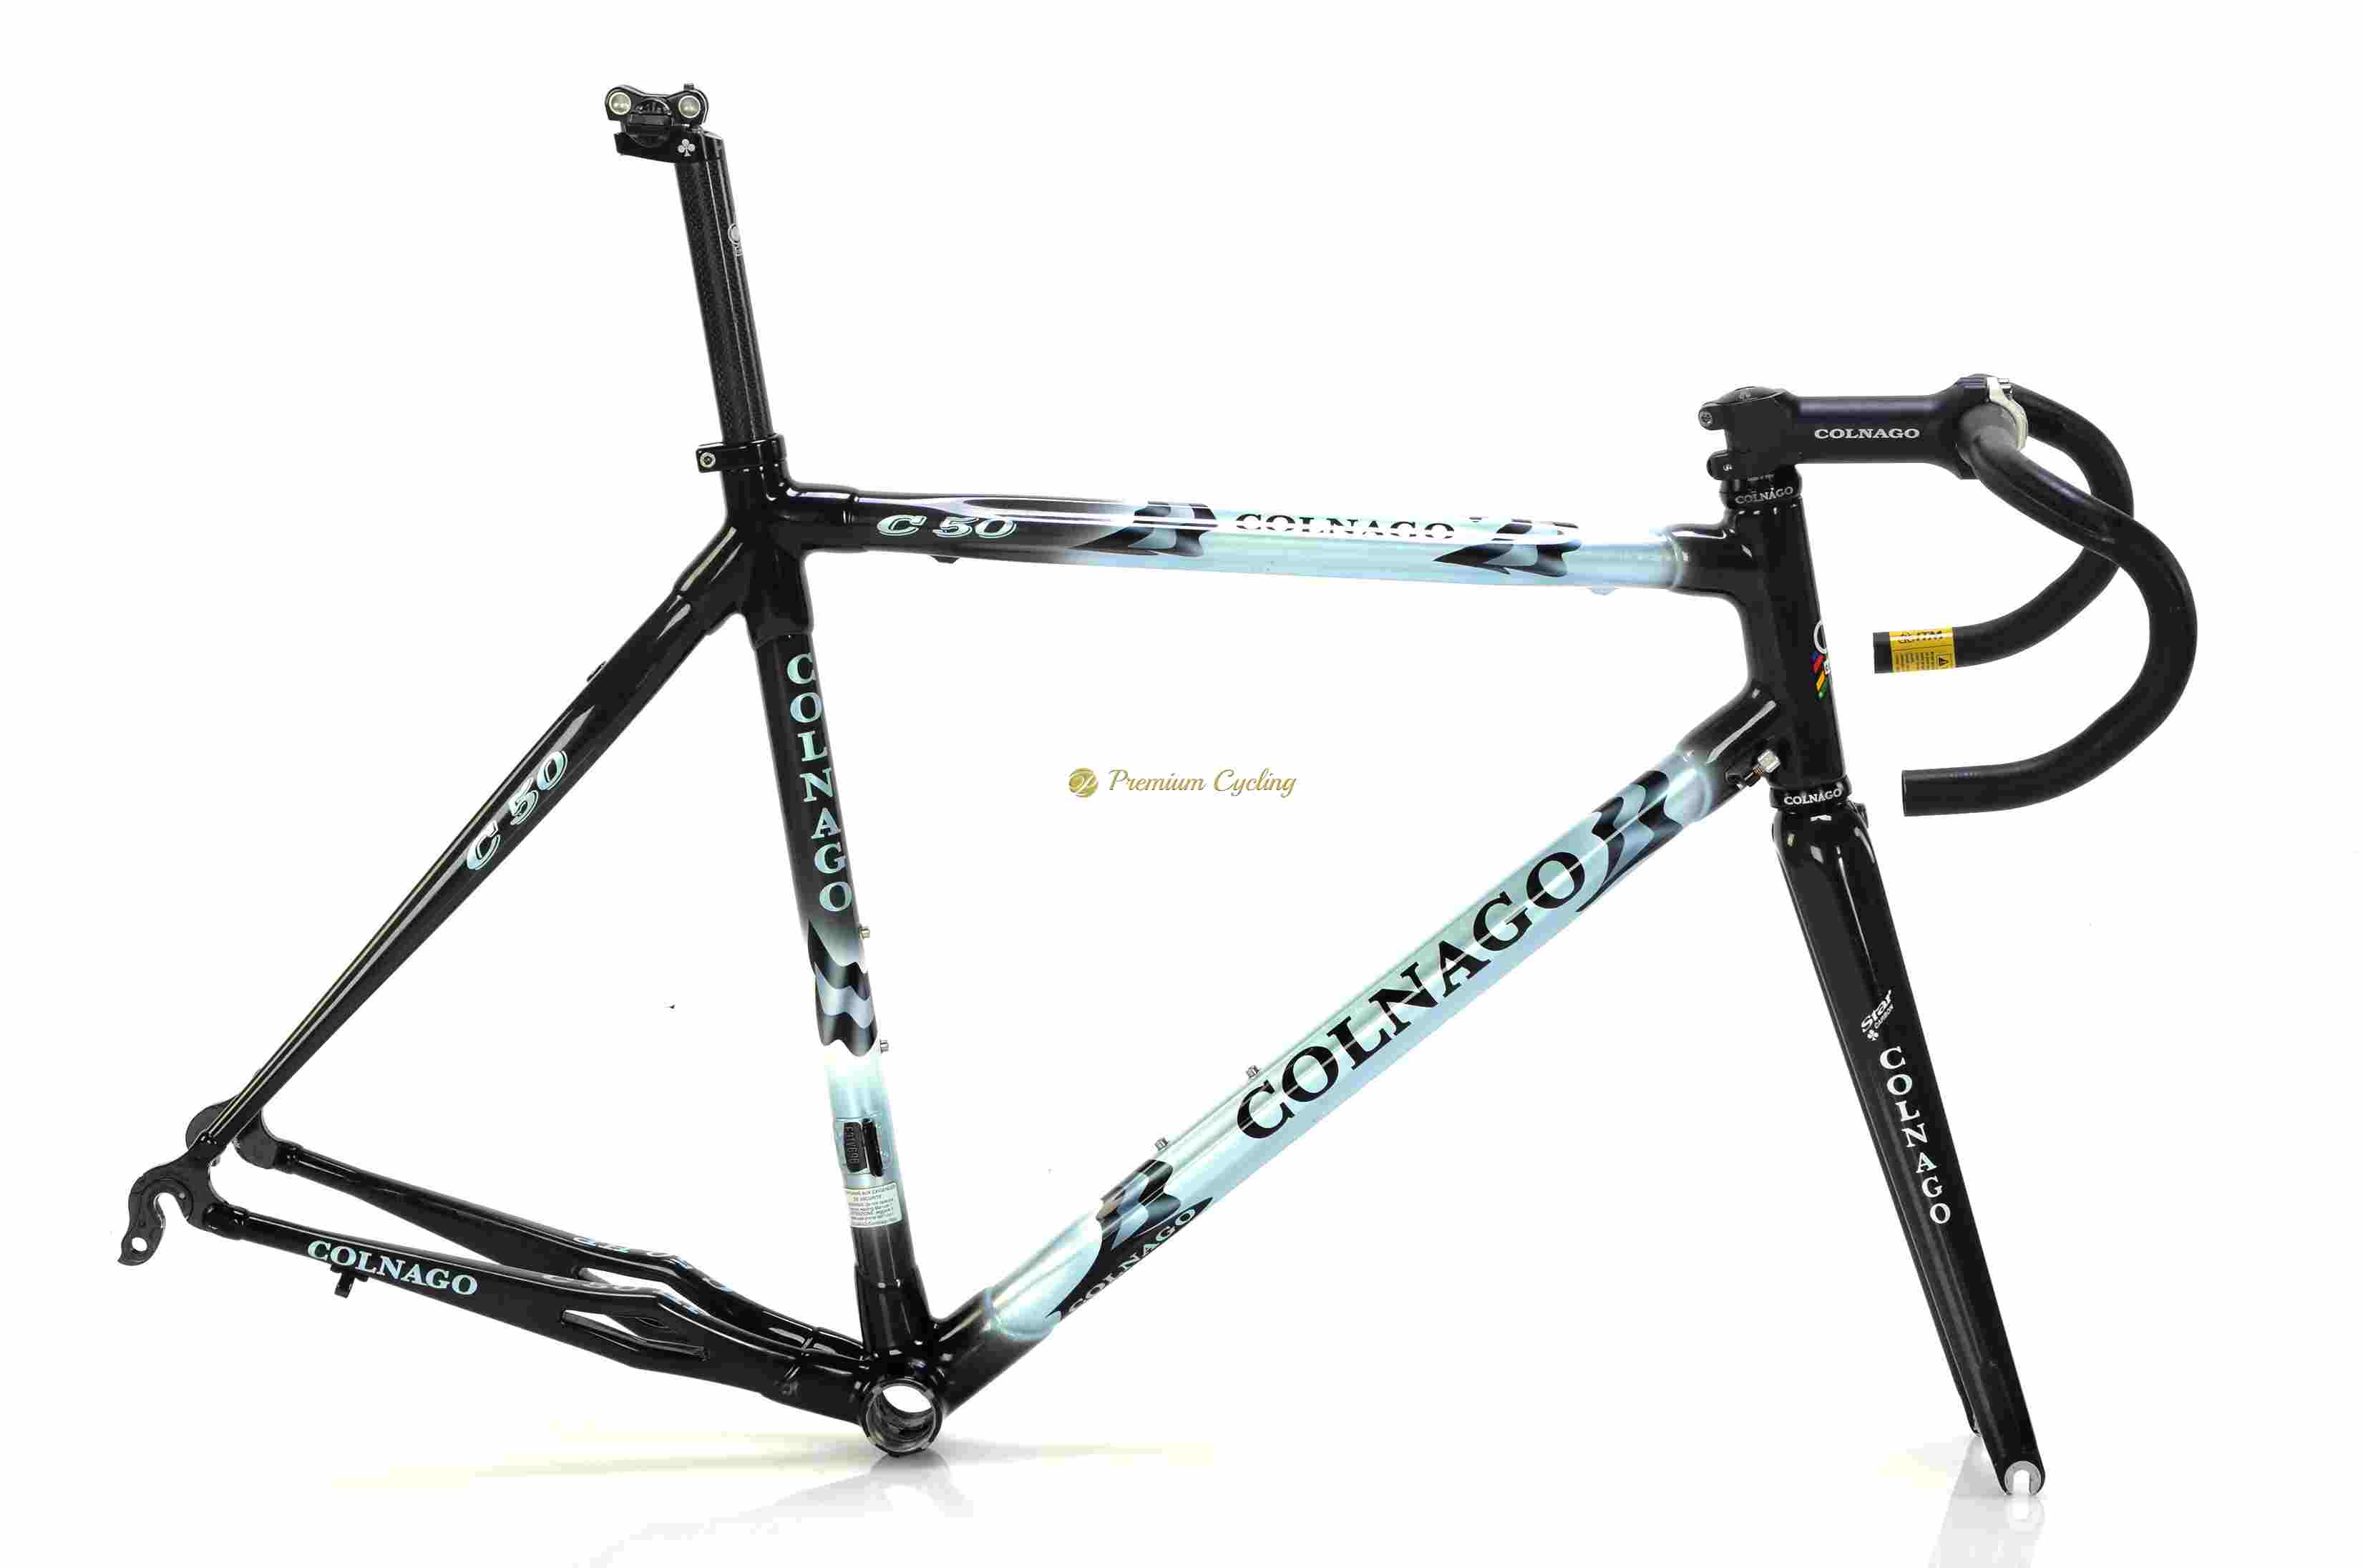 Colnago C50 Hp Frameset 54cm 05 Sold Premium Cycling Website For Steel And Collectible Vintage Bikes Parts And Clothing